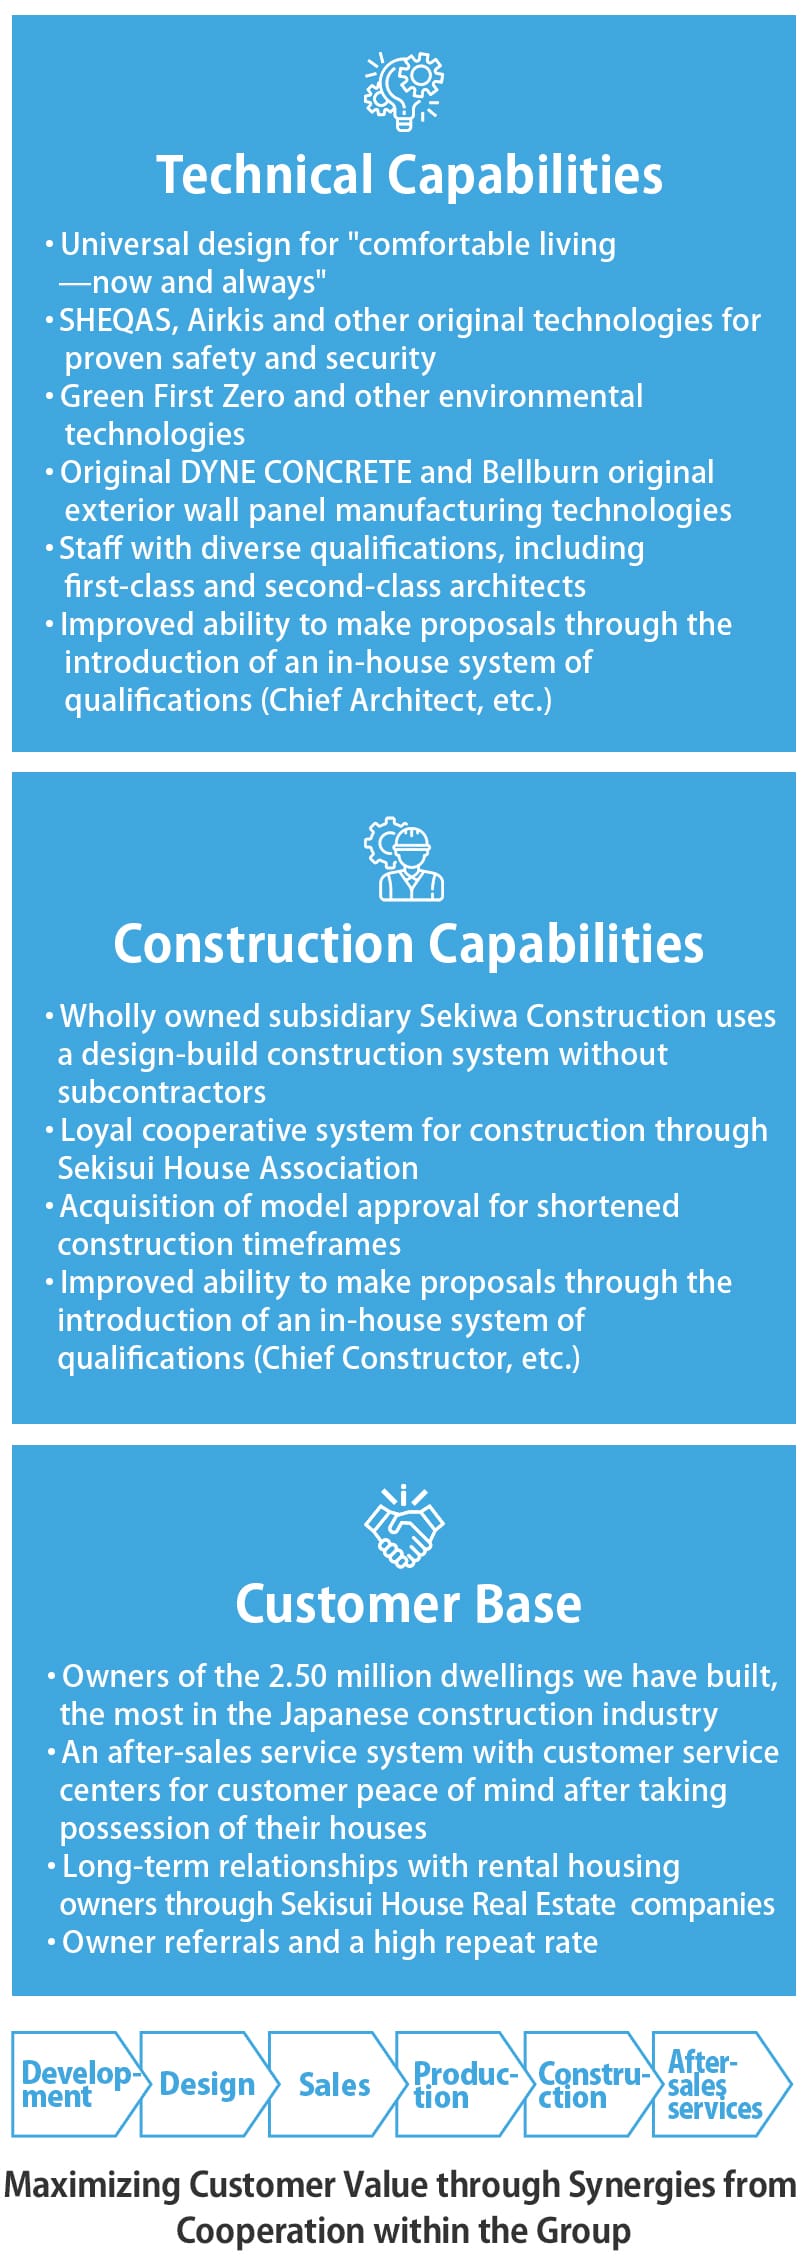 Our technical capabilities